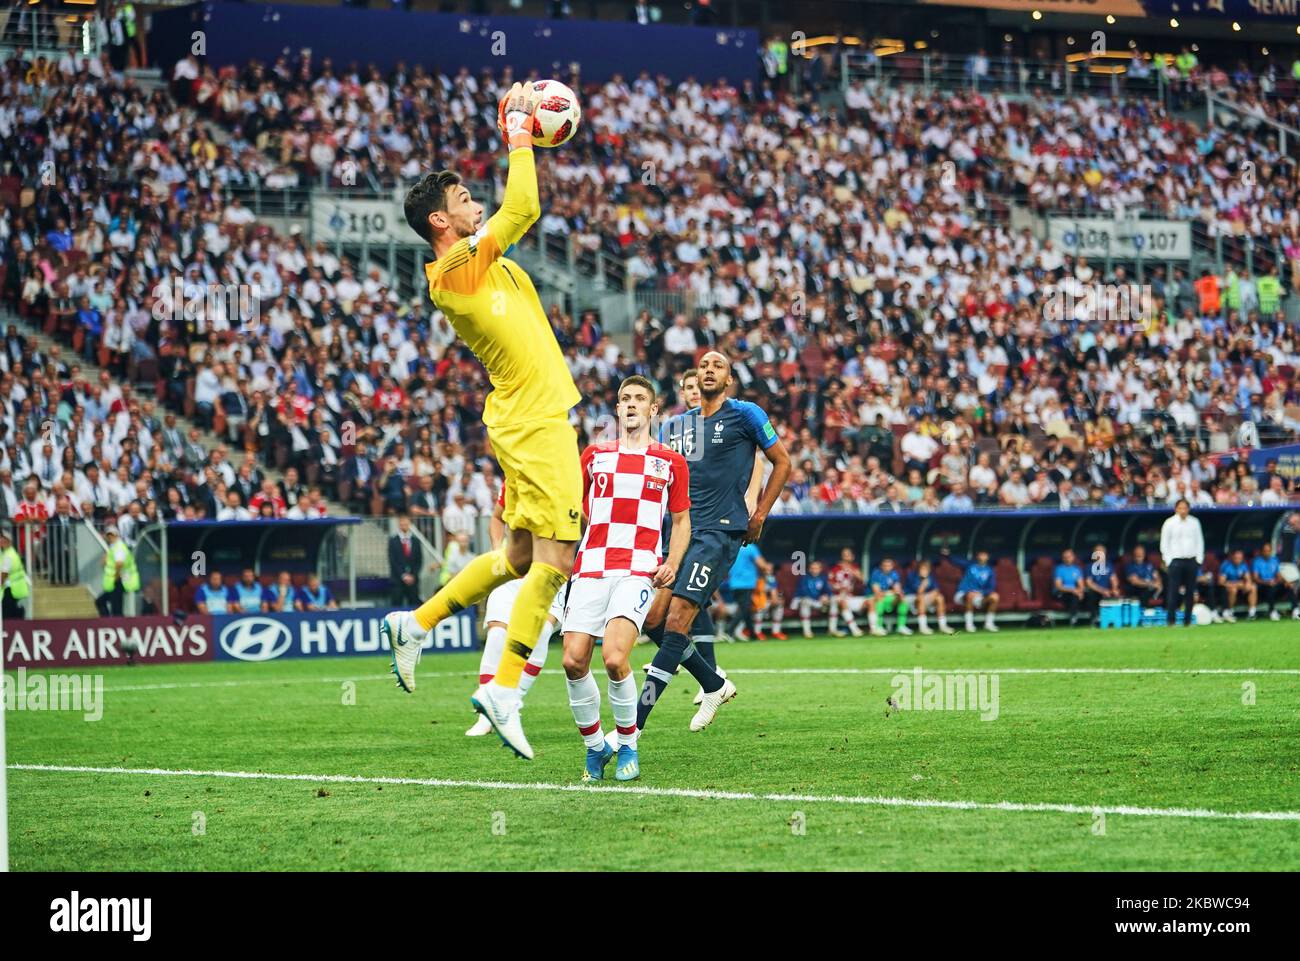 Hugo Lloris of France catching the ball during the FIFA World Cup match France versus Croatia at Luzhniki Stadium, Moscow, Russia on July 15, 2018. (Photo by Ulrik Pedersen/NurPhoto) Stock Photo